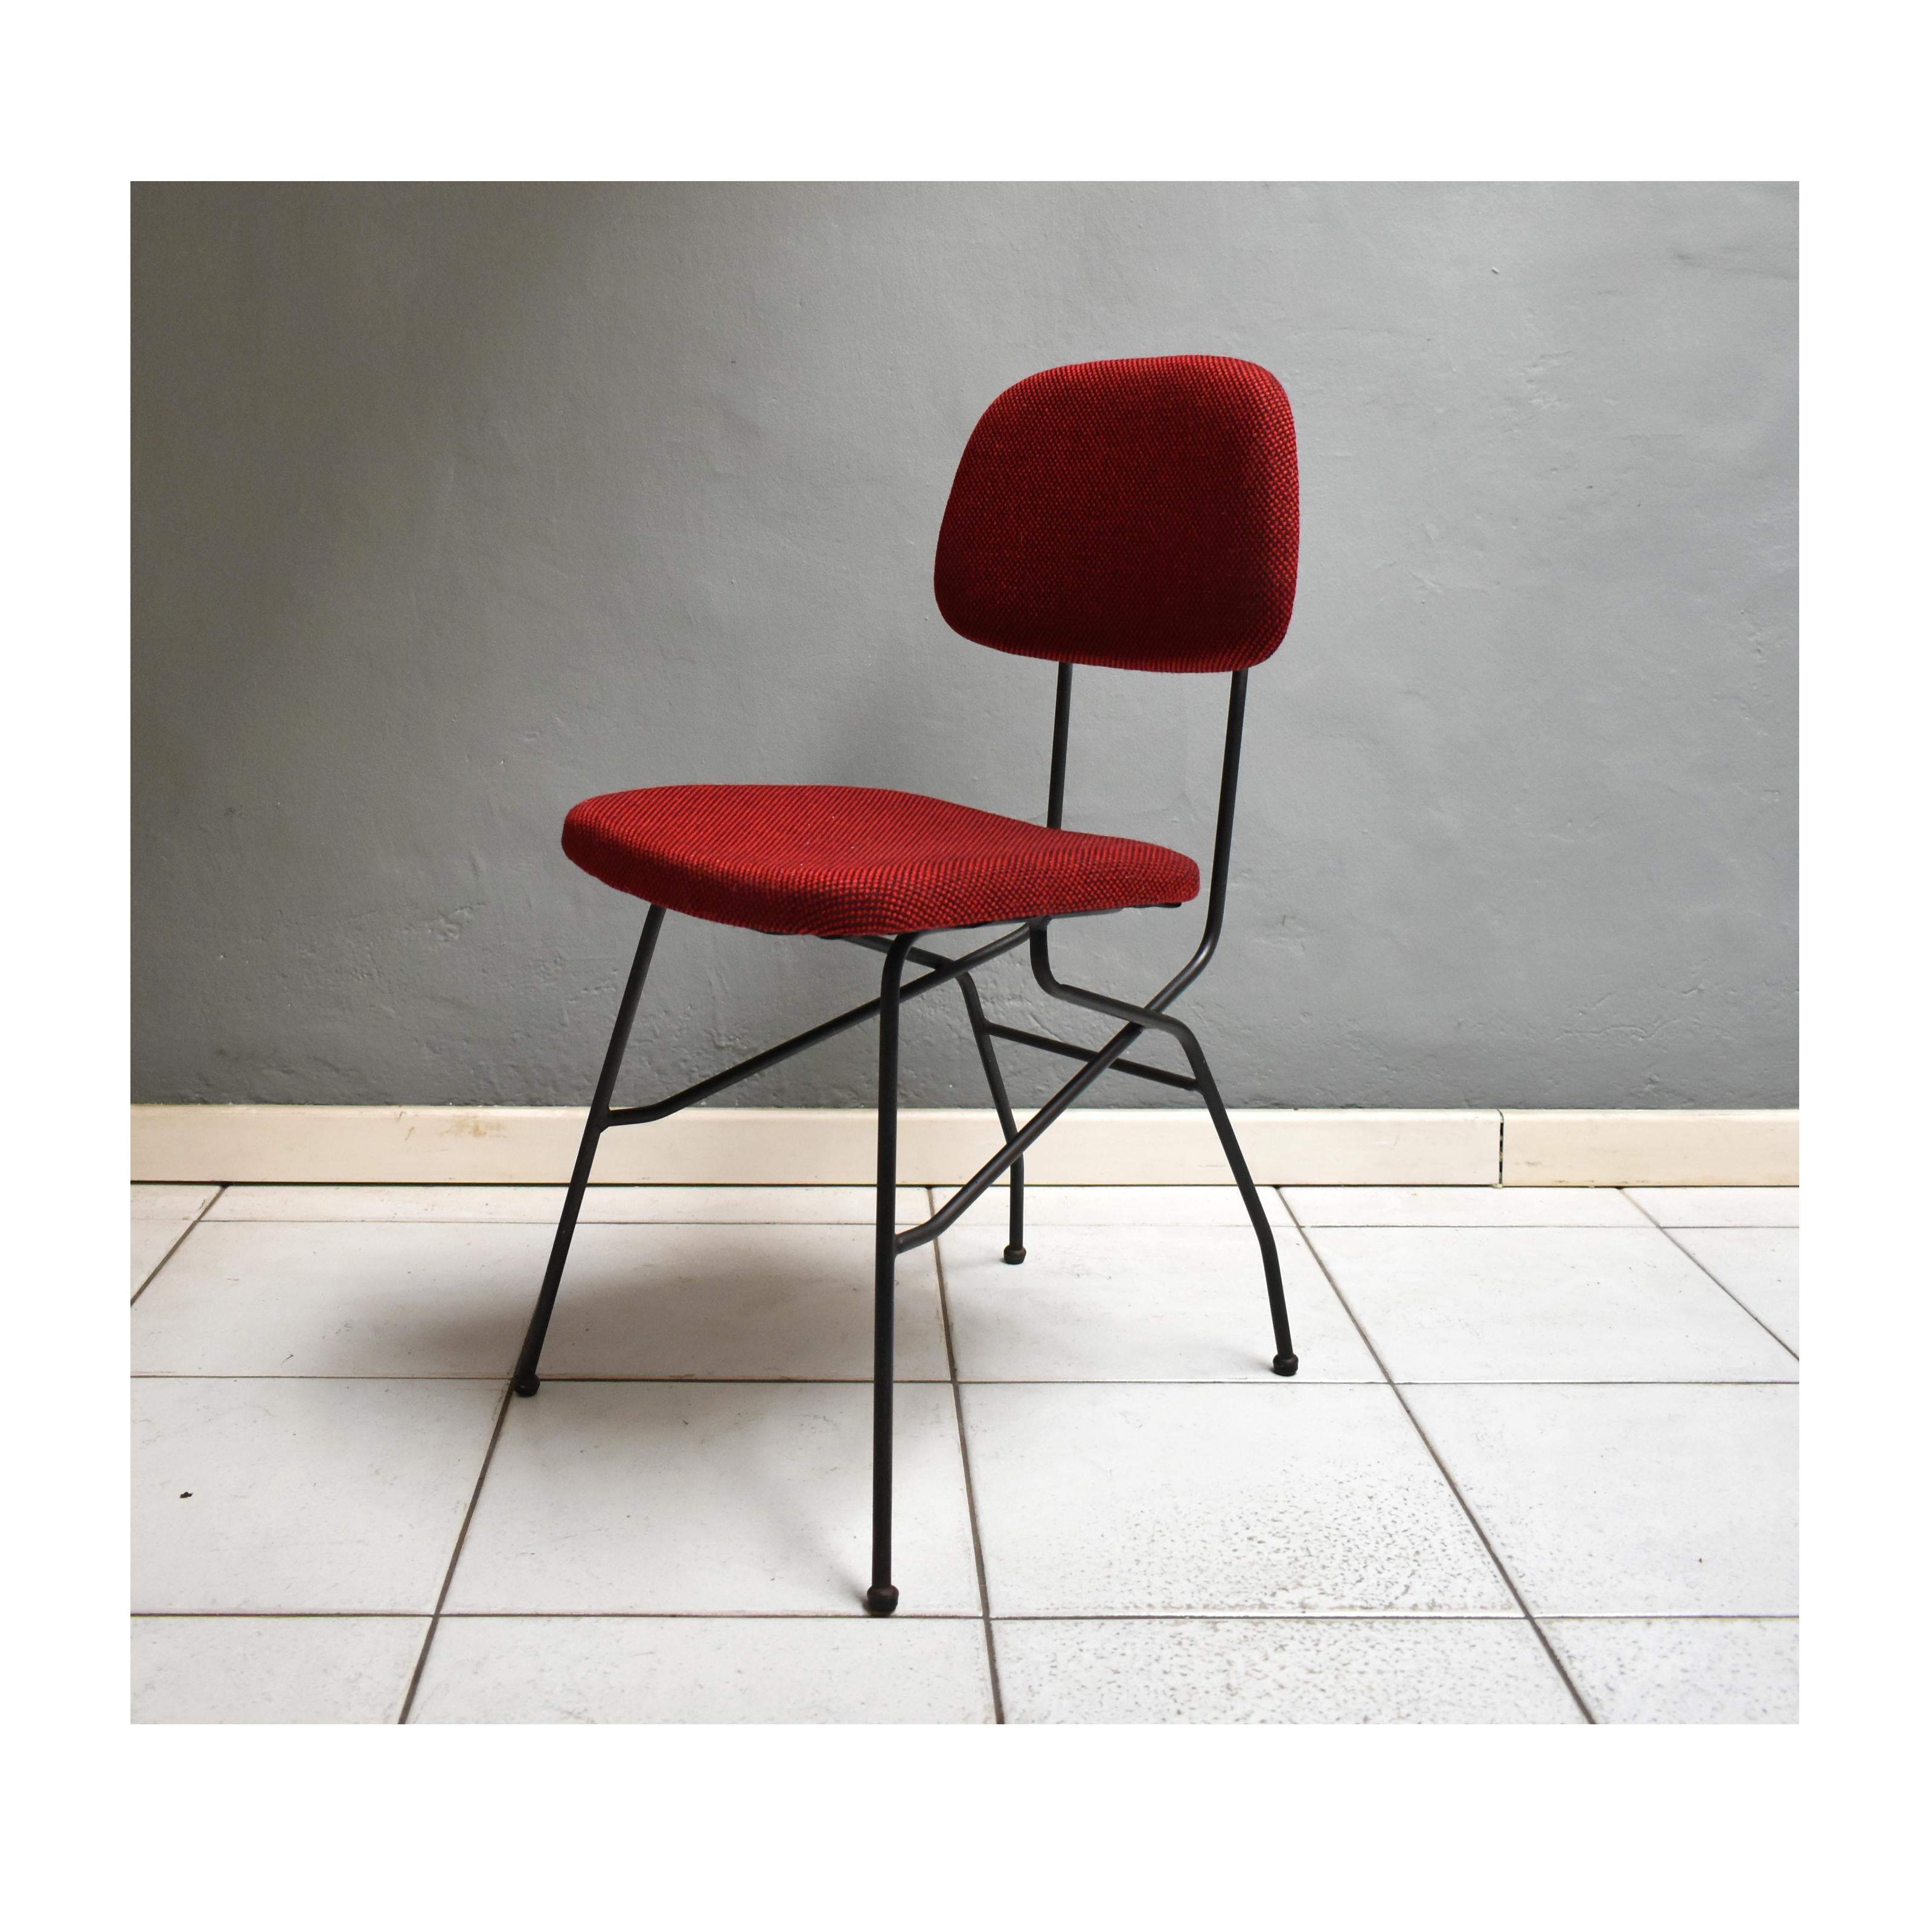 Set of four vintage sixties chairs, Italian manufacture.
The chairs have a black iron structure with seat and back in red-bordeaux fabric with black dots. On the back of the back there are brass buttons.

Measures
Height: 78 cm
Seat height: 44